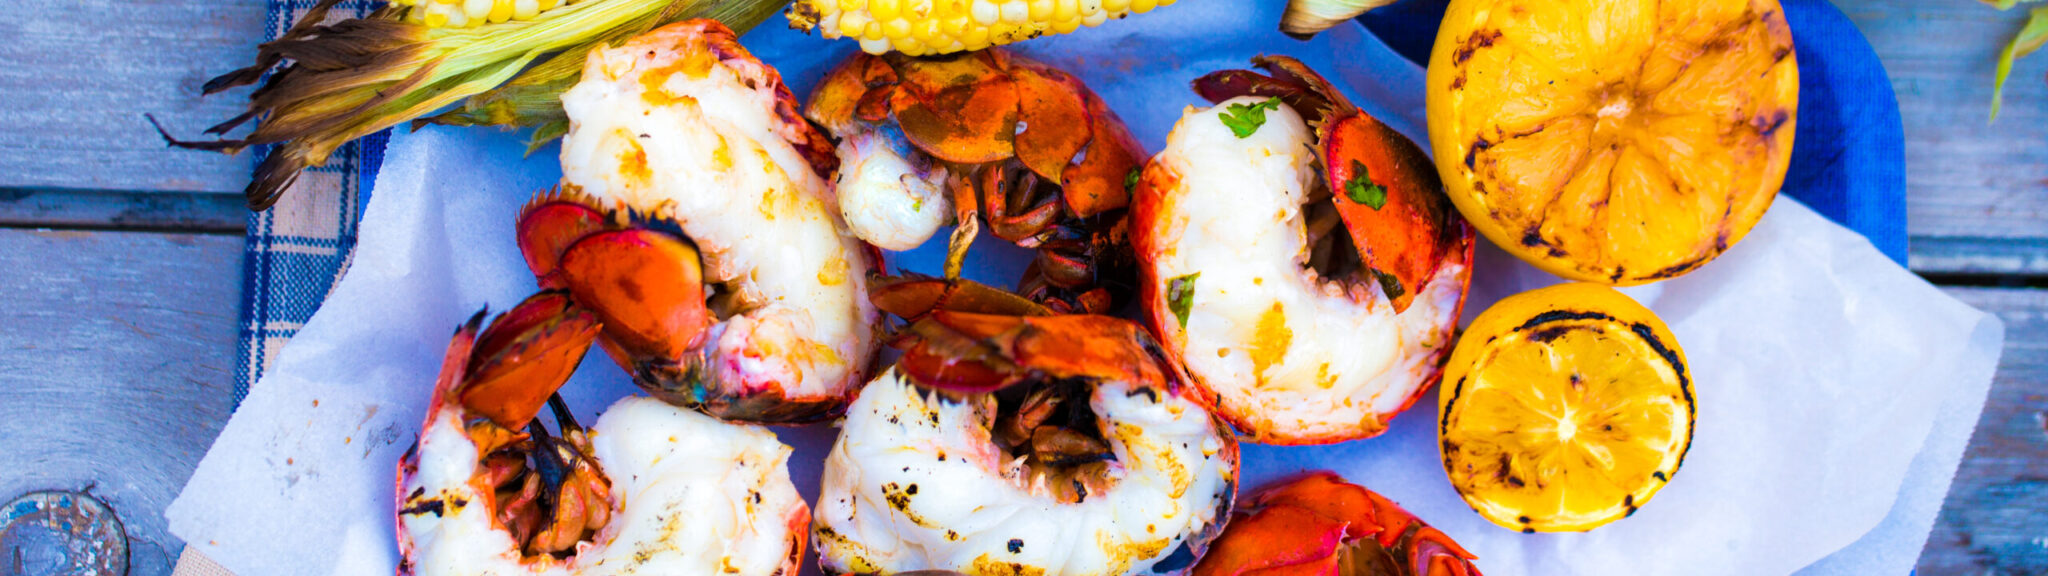 Grilled Maine Lobster Tails recipe image